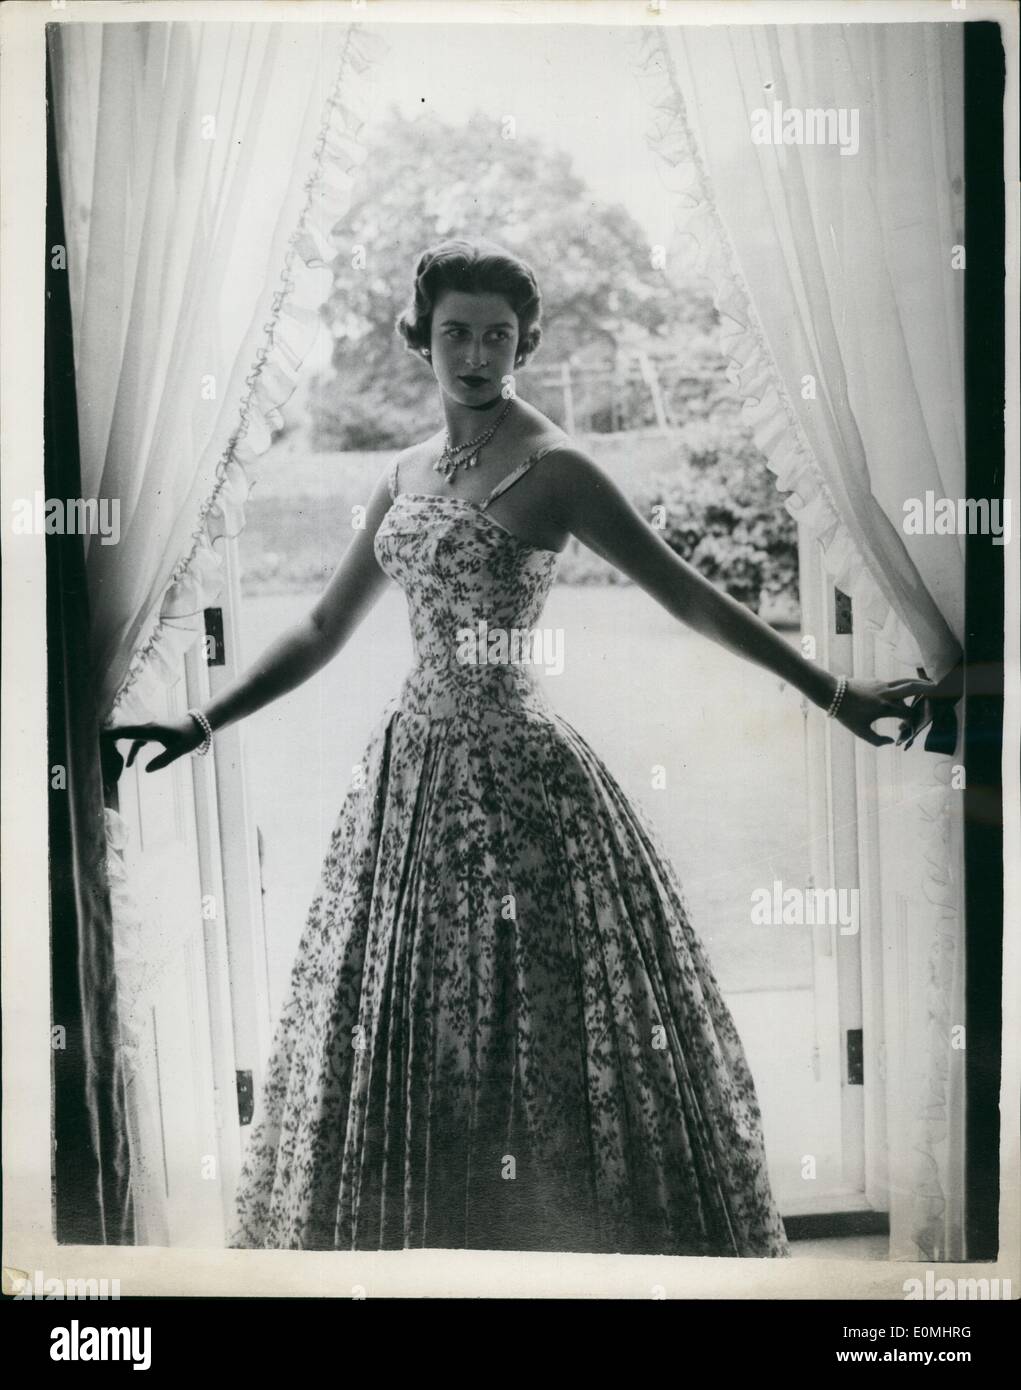 Aug. 08, 1955 - New Portrait Study Of H.R.H. Princess Alexandra: This new study of H.R.H. Princess Alexandra of Kent was made by Cecil Beaton in the Drawing Room at Kensington Palace, London - in July 1955. In this picture H.R.H. is wearing pearl car-rings, Diamond and Pearl necklace and Pearl bracelets with a red and white flowered evening gown. Stock Photo